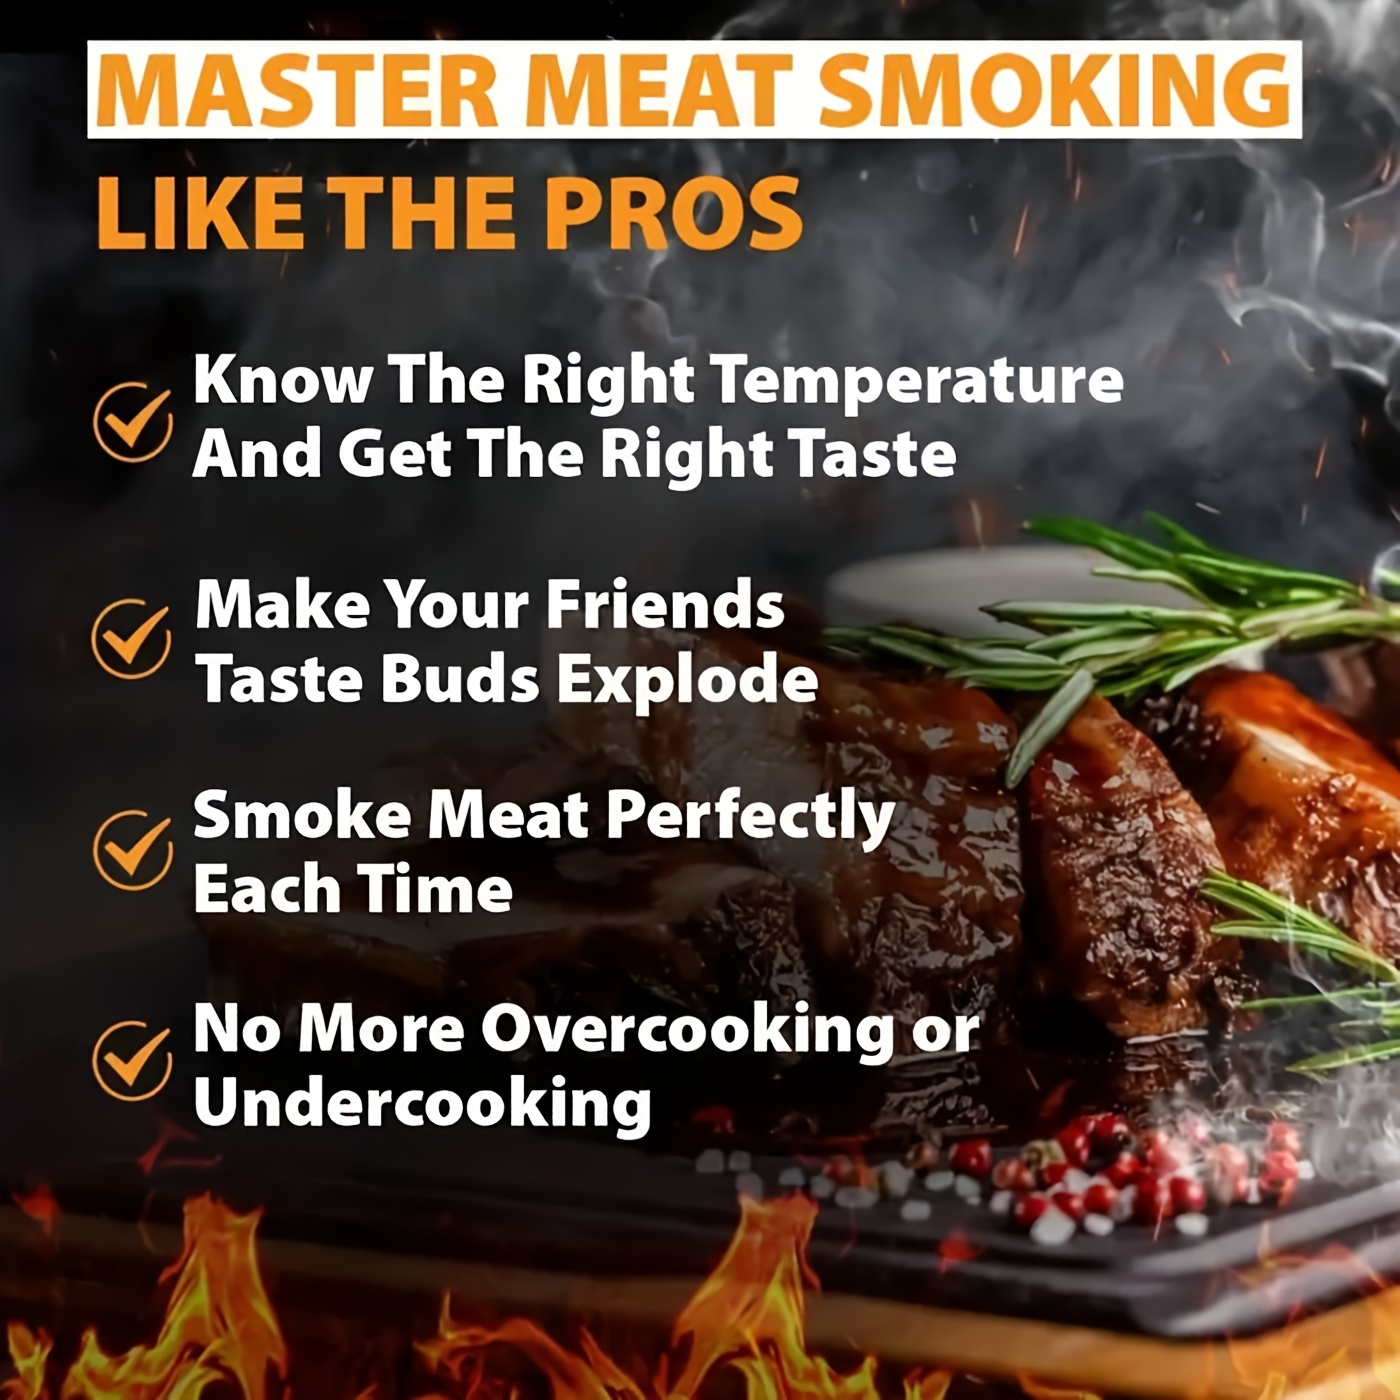 Meat Smoking Guide Magnet with Important Smoking Time, Target Temperature &  Wood Flavours Accessories for BBQ, Grilling & Smoking Meats for BBQ Lovers